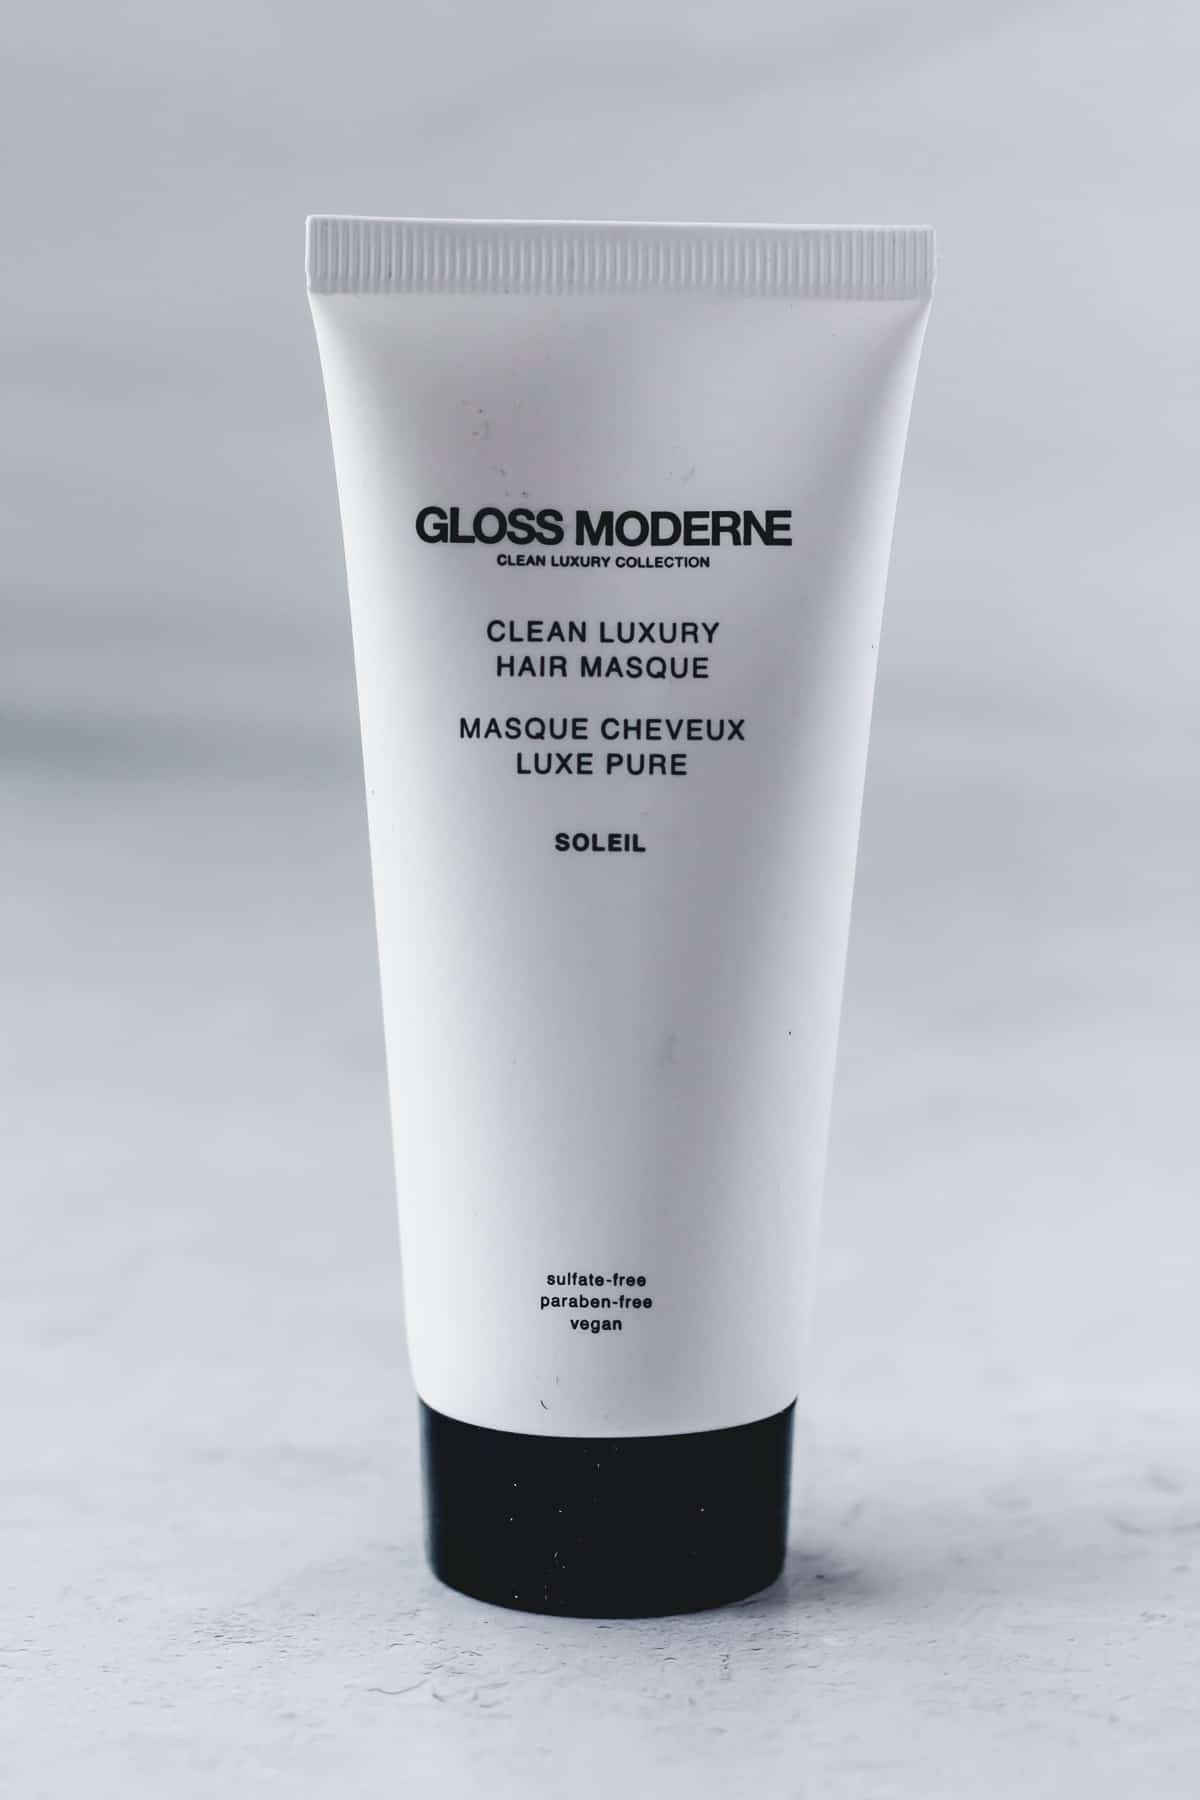 Gloss Moderne Clean Luxury Hair Masque on a white background